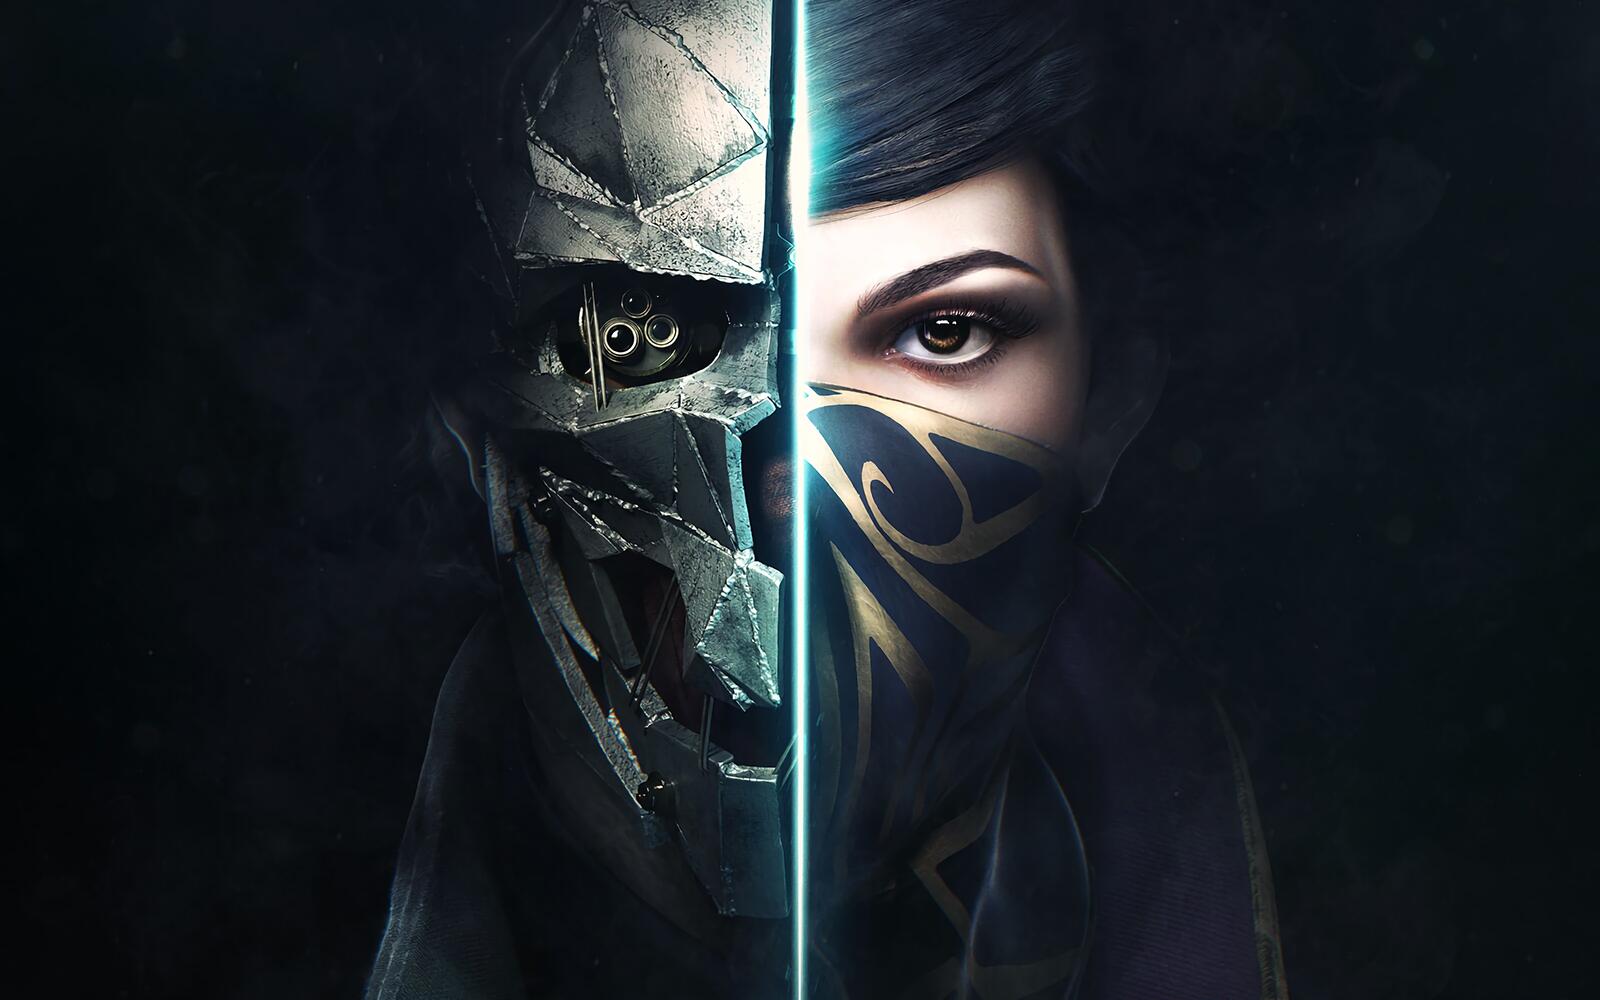 Wallpapers wallpaper dishonored 2 two sides face on the desktop